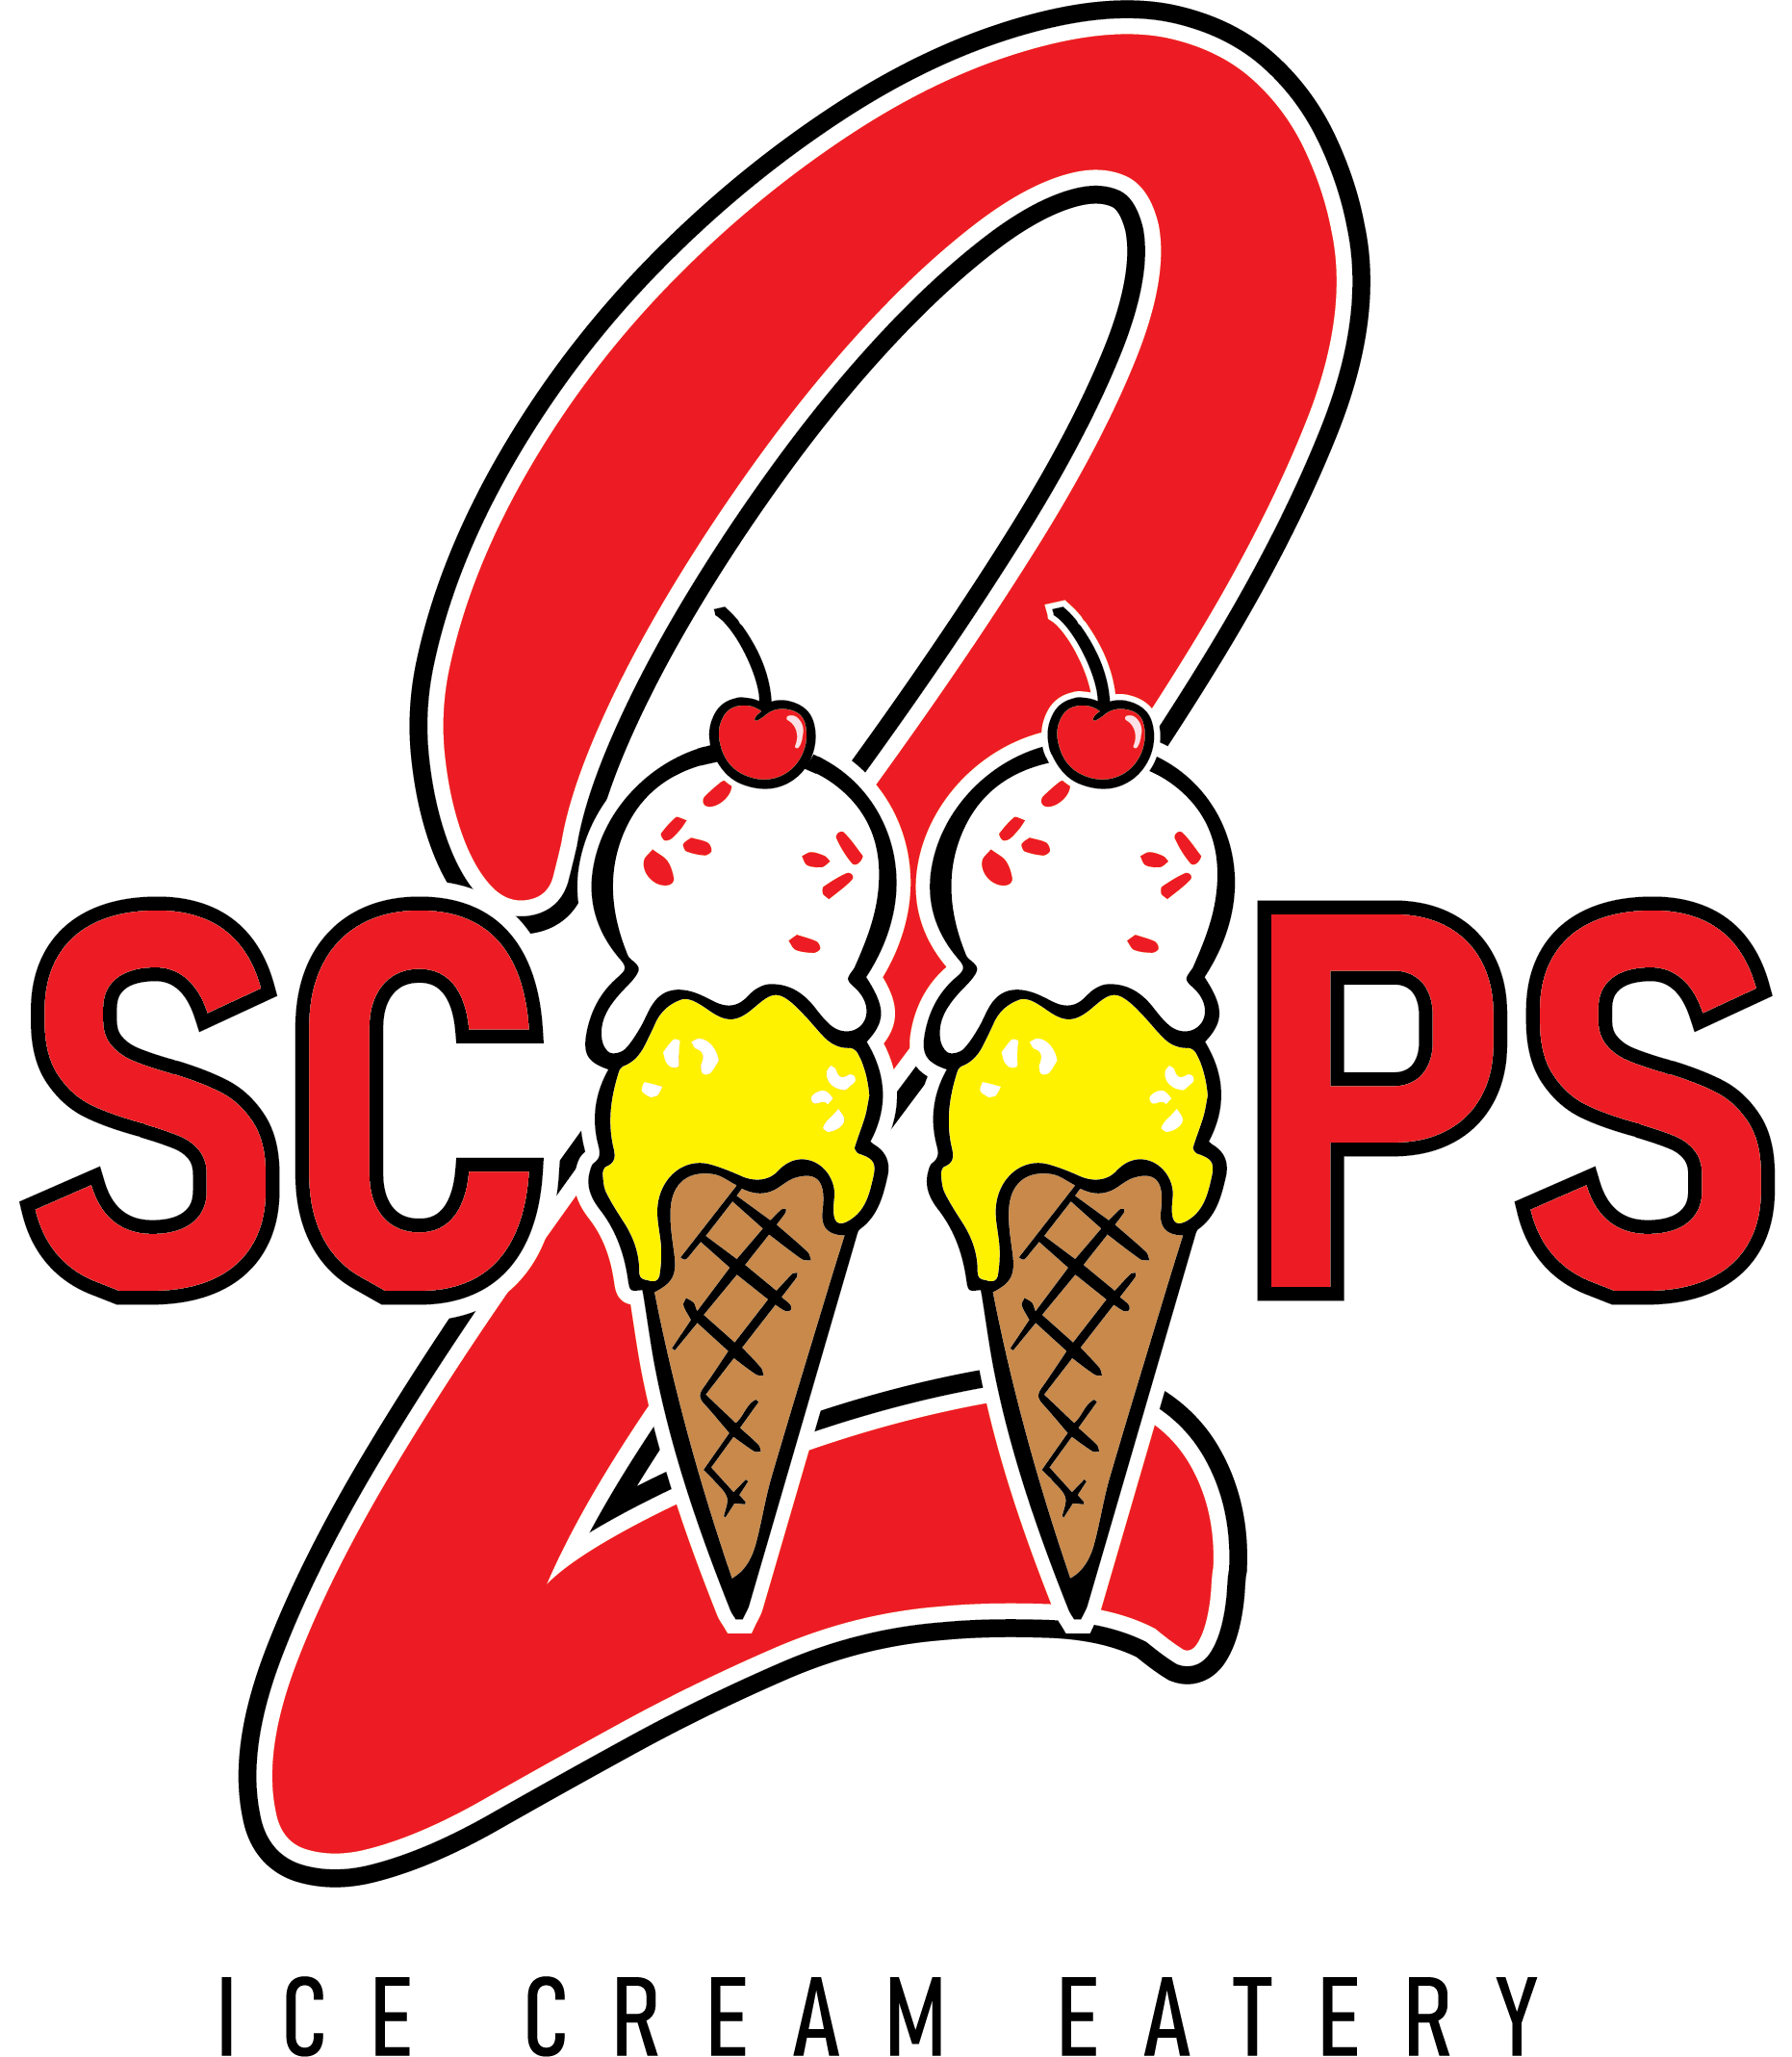 2 Scoops Ice Cream Eatery 921 Selby Avenue